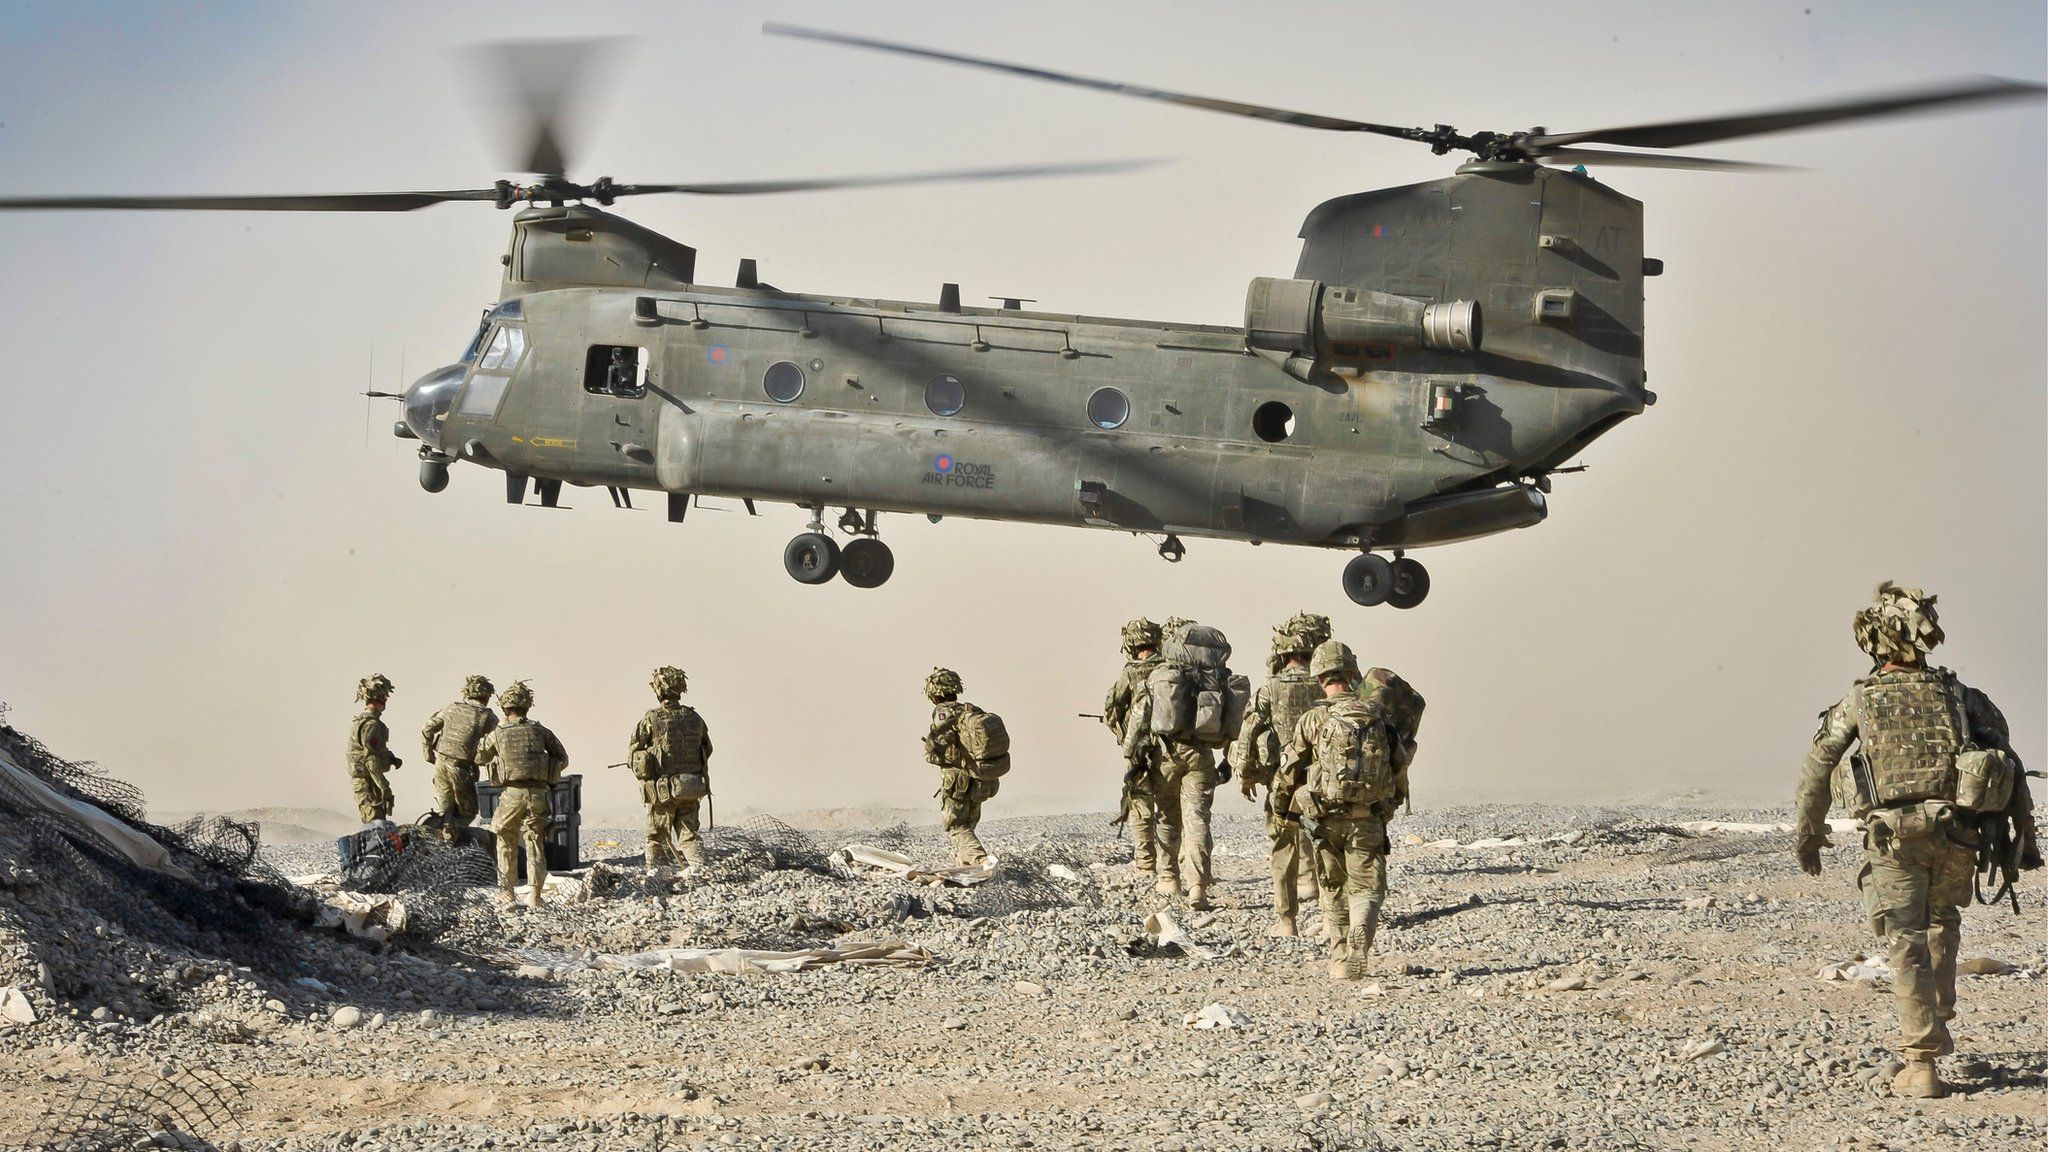 British soldiers approach a Chinook aircraft in the Nahr-e Saraj district, Helmand Province, Afghanistan. Picture date October 2013.